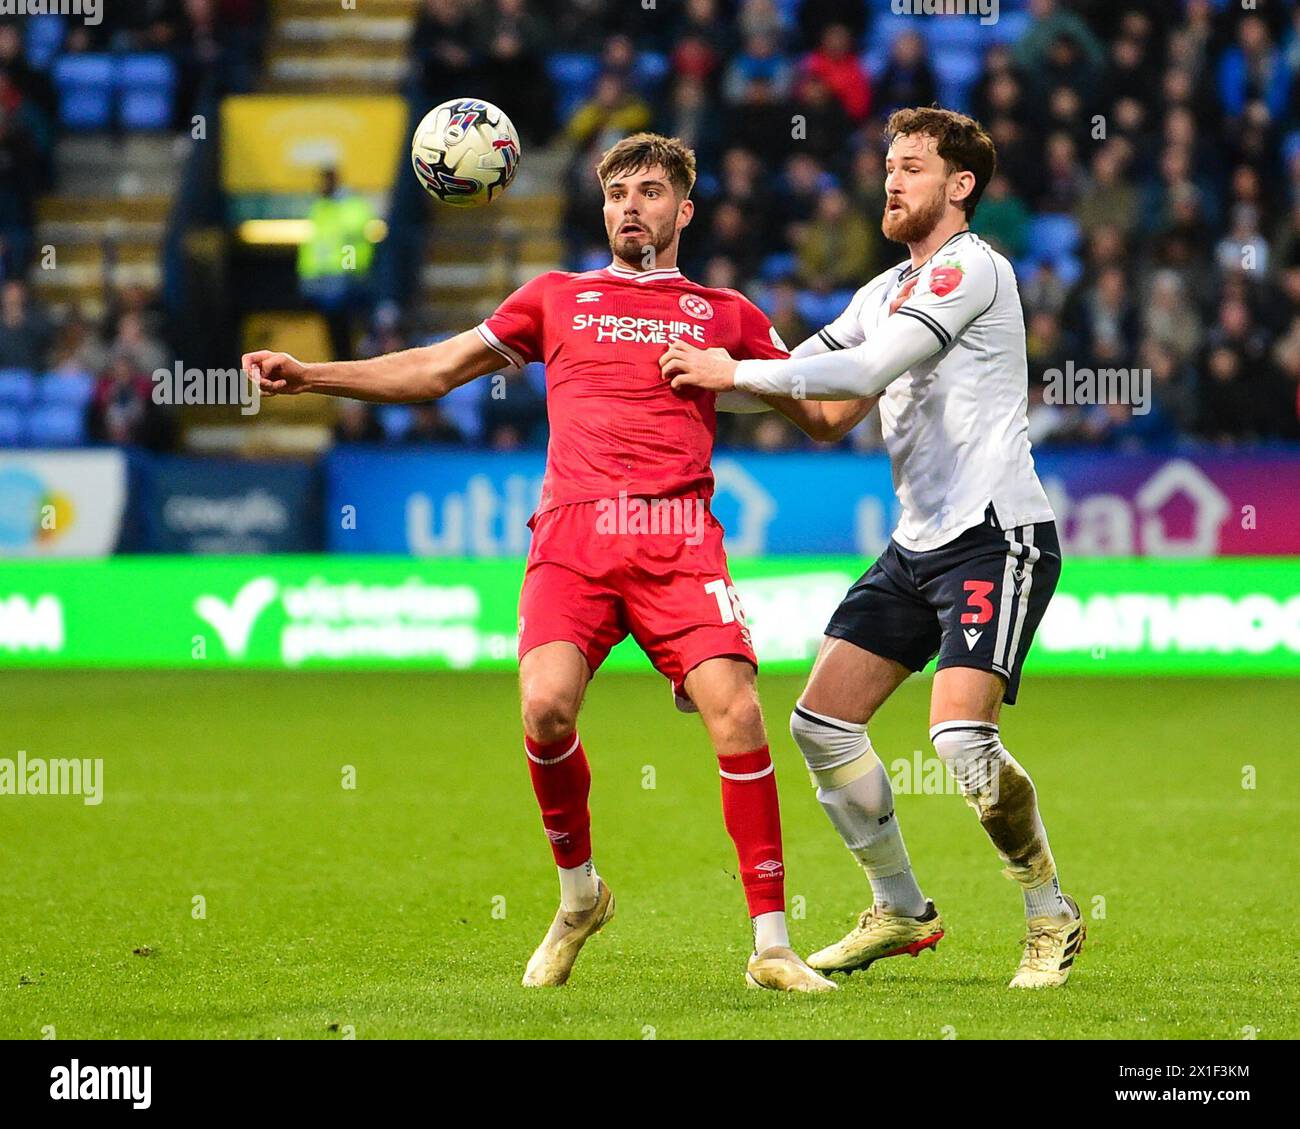 Tom Bloxham of Shrewsbury Town is challenged by Jack Iredale of Bolton Wanderers during the Sky Bet League 1 match Bolton Wanderers vs Shrewsbury Town at Toughsheet Community Stadium, Bolton, United Kingdom, 16th April 2024  (Photo by Lloyd Jones/News Images) Stock Photo